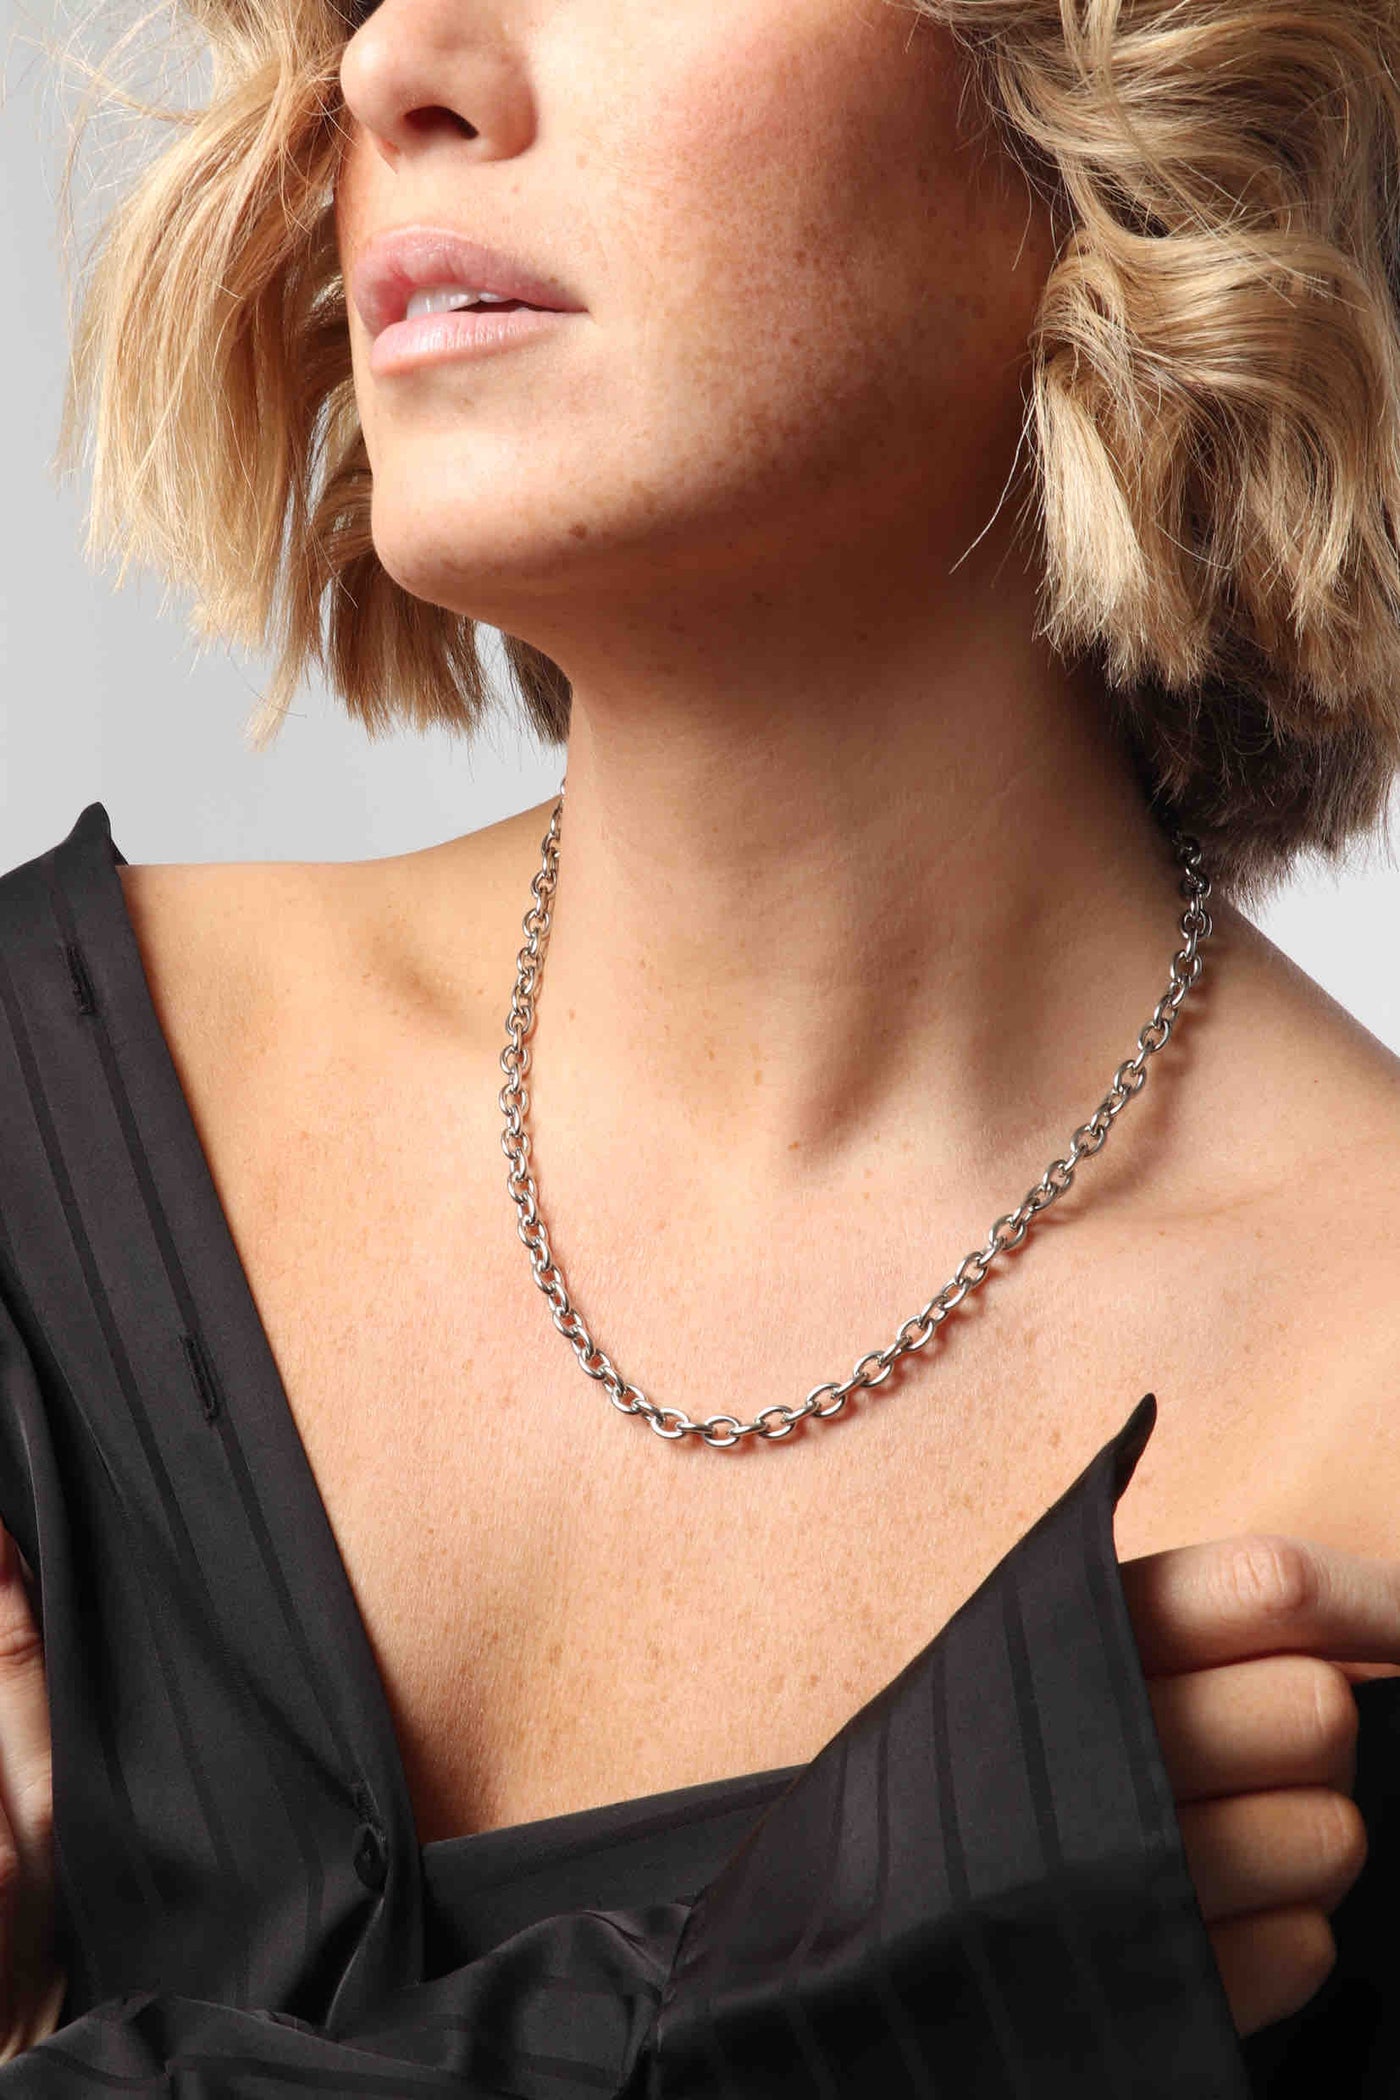 Marrin Costello wearing Marrin Costello Jewelry Mica Chain round link chain with lobster clasp closure and extender. Waterproof, sustainable, hypoallergenic. Polished stainless steel.